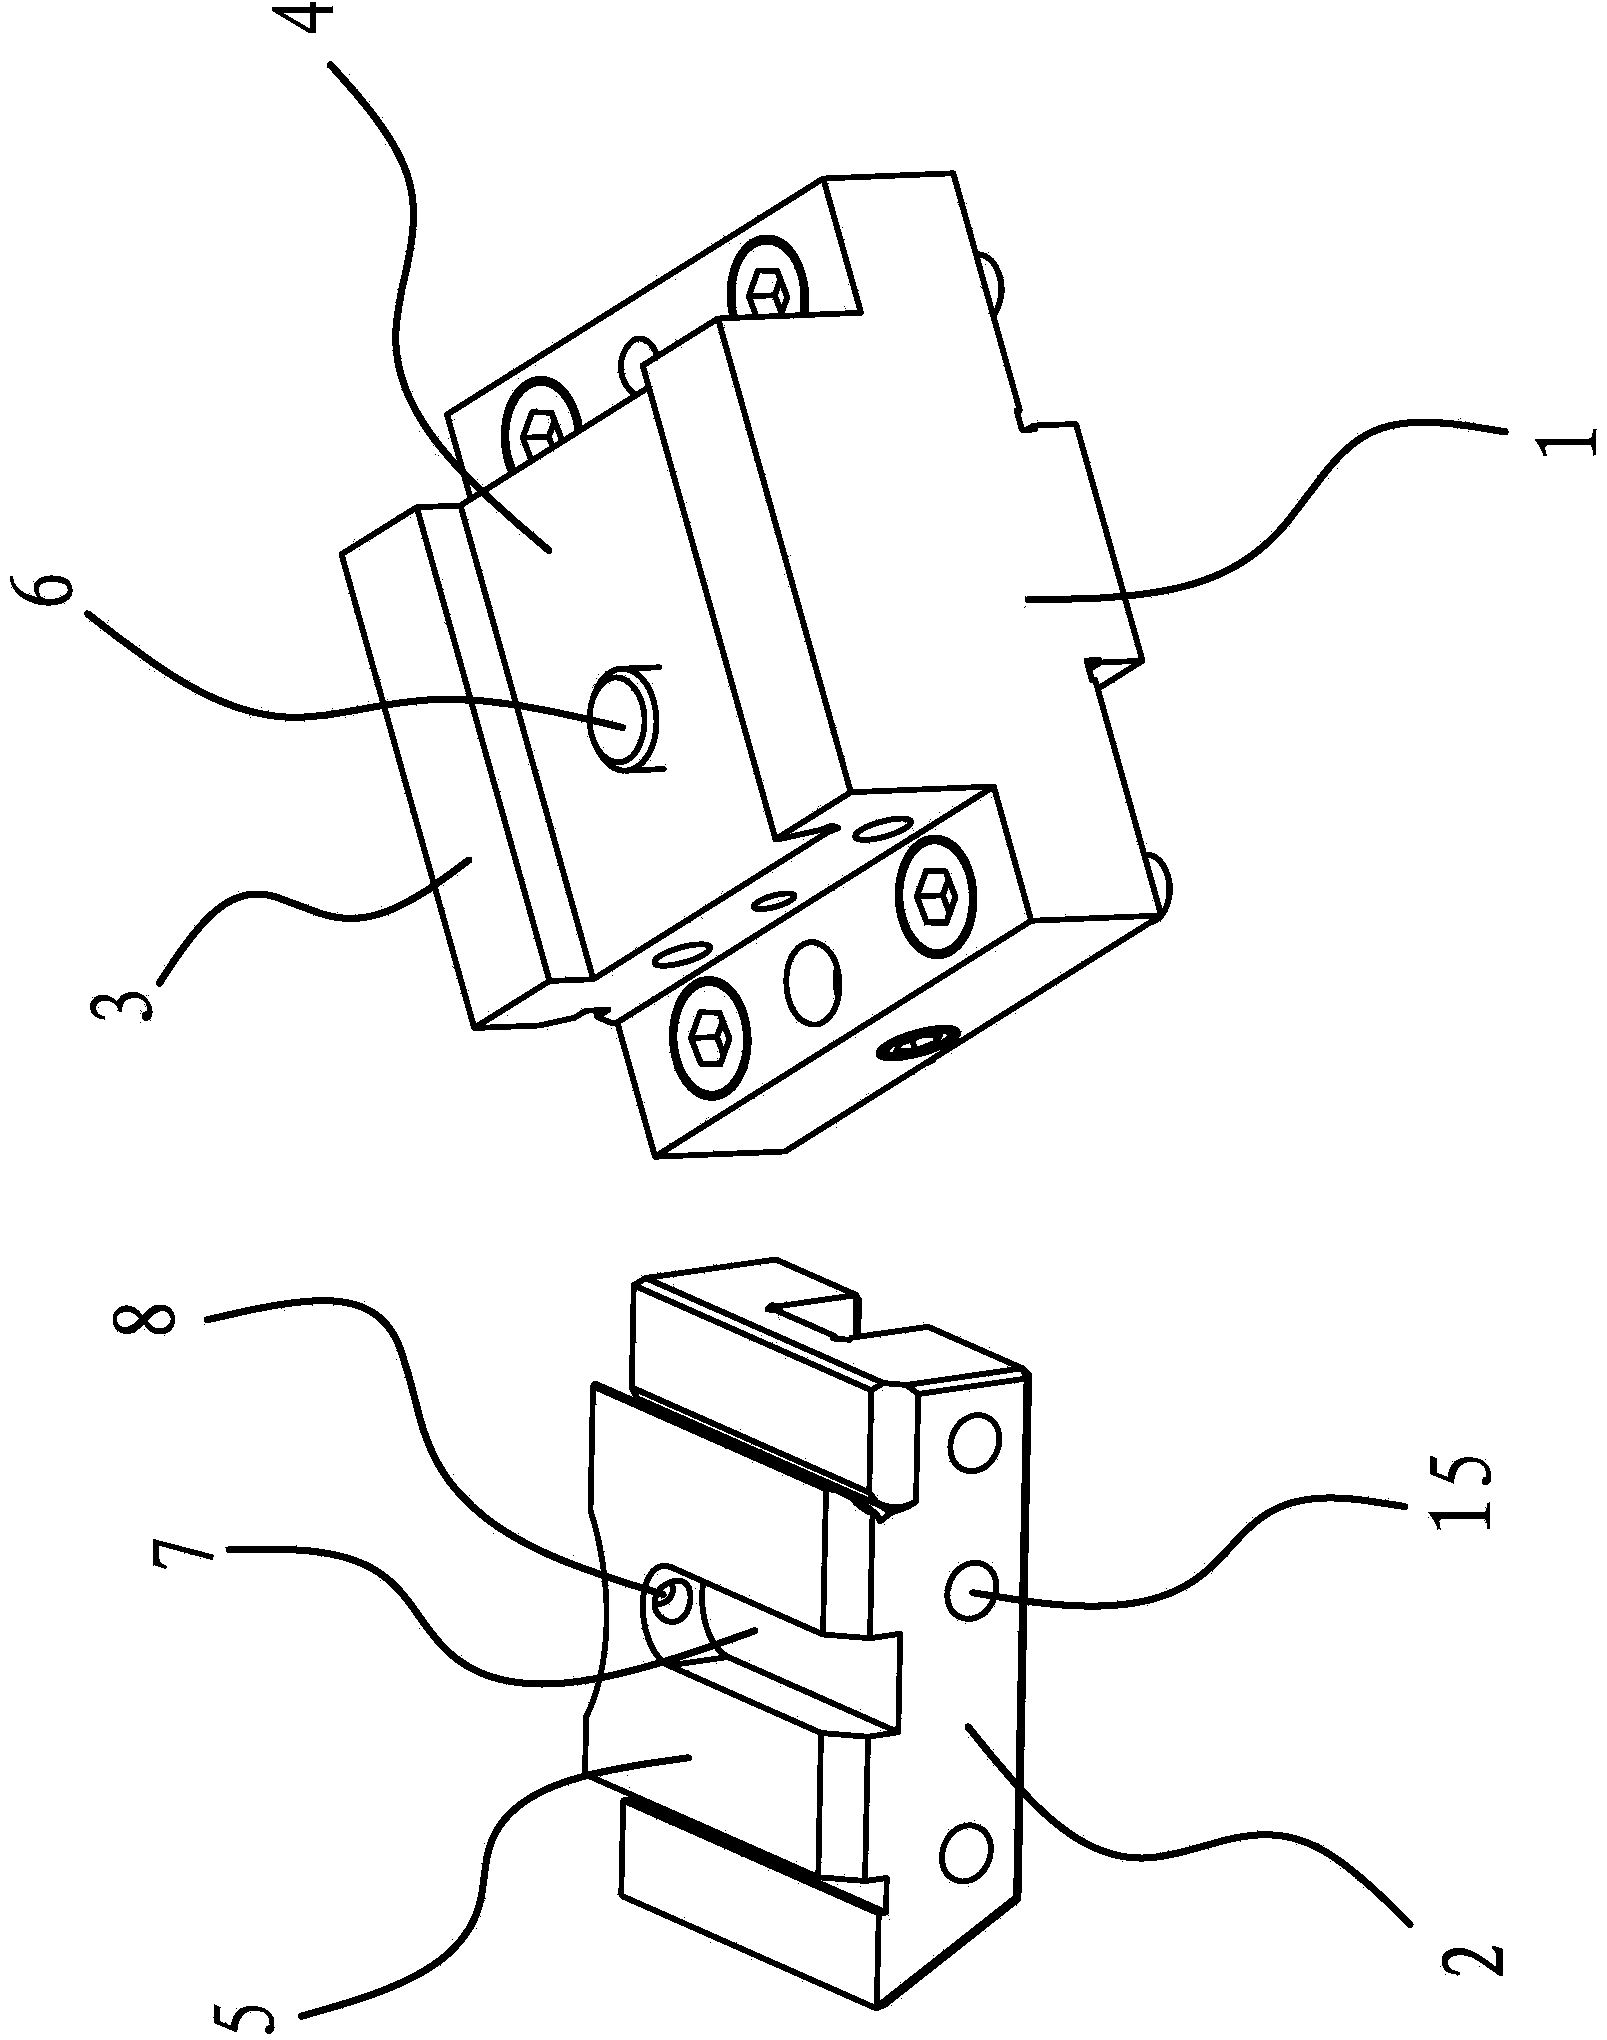 Detachable tool rest on numerically-controlled machine tool